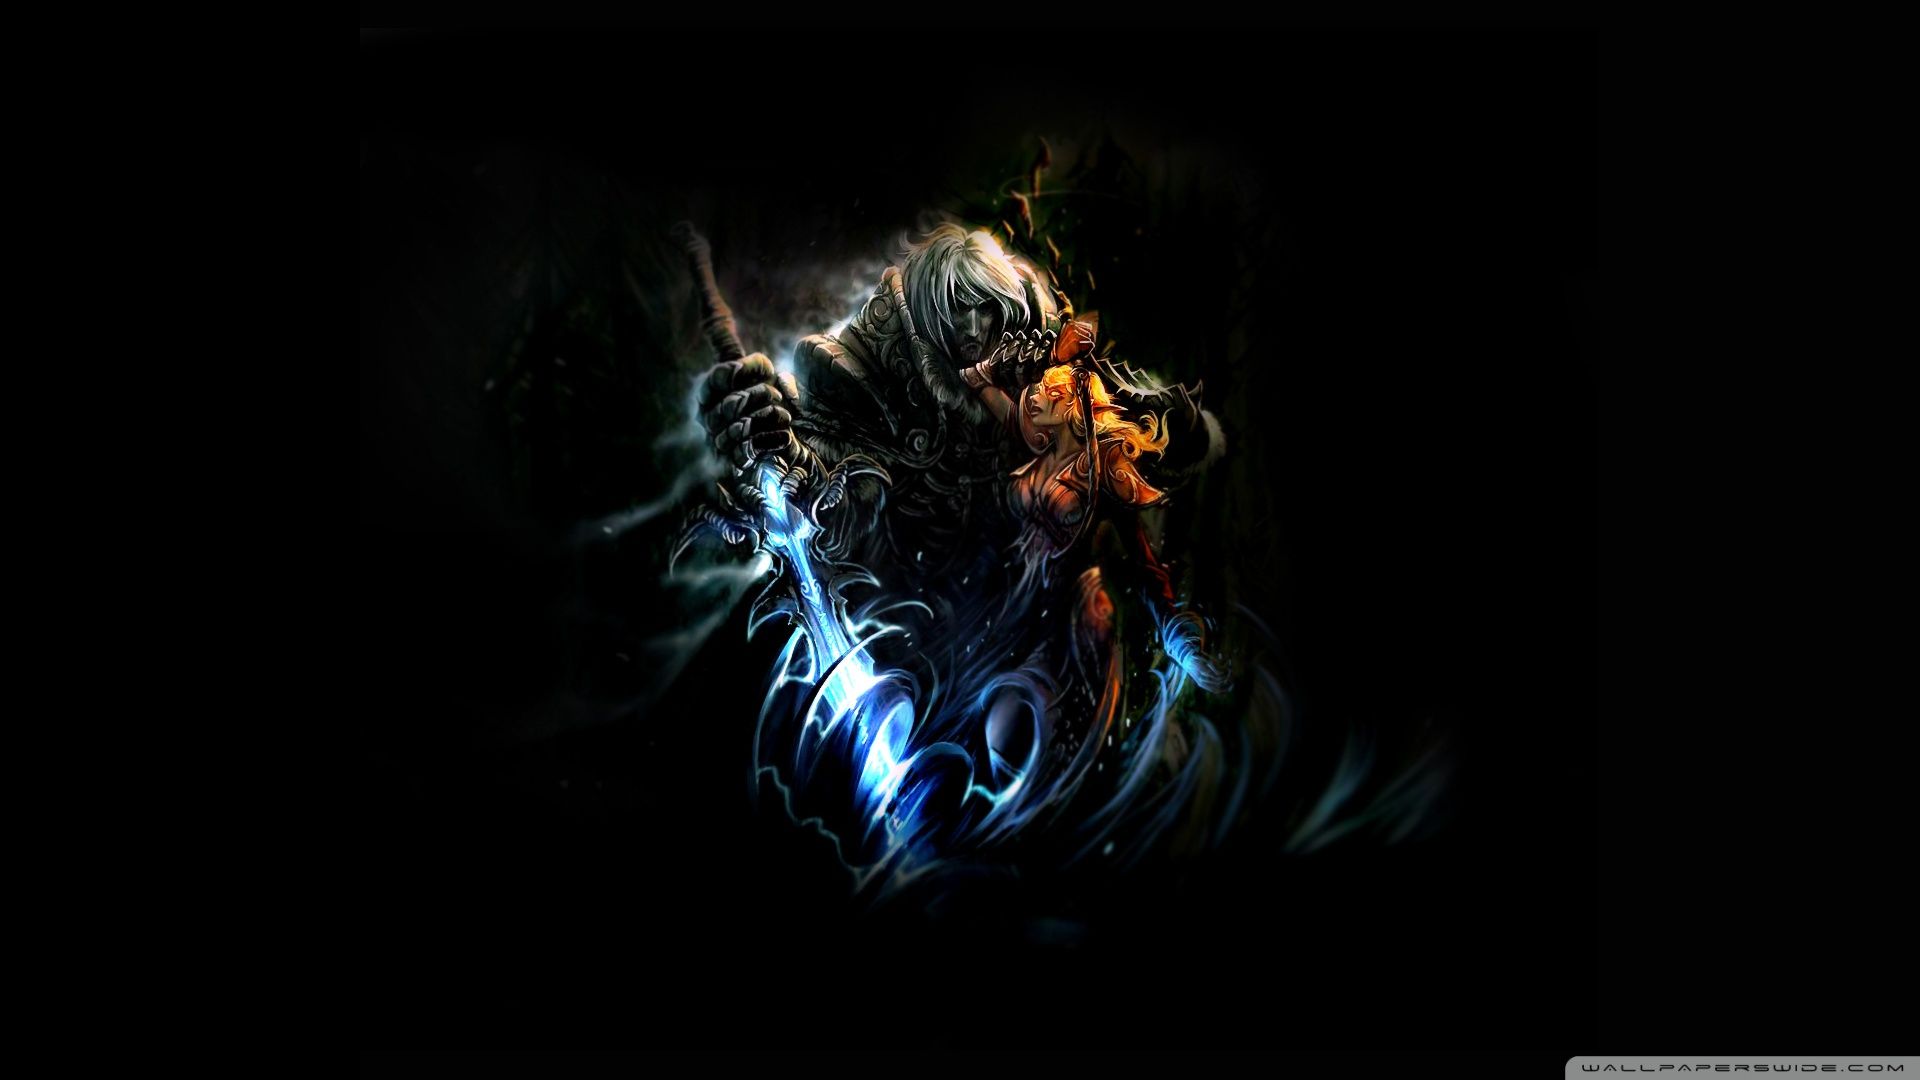 WoW Wallpaper 1920X1080. Awesome WoW Wallpaper, WoW Old Gods Wallpaper and WoW Werewolf Wallpaper